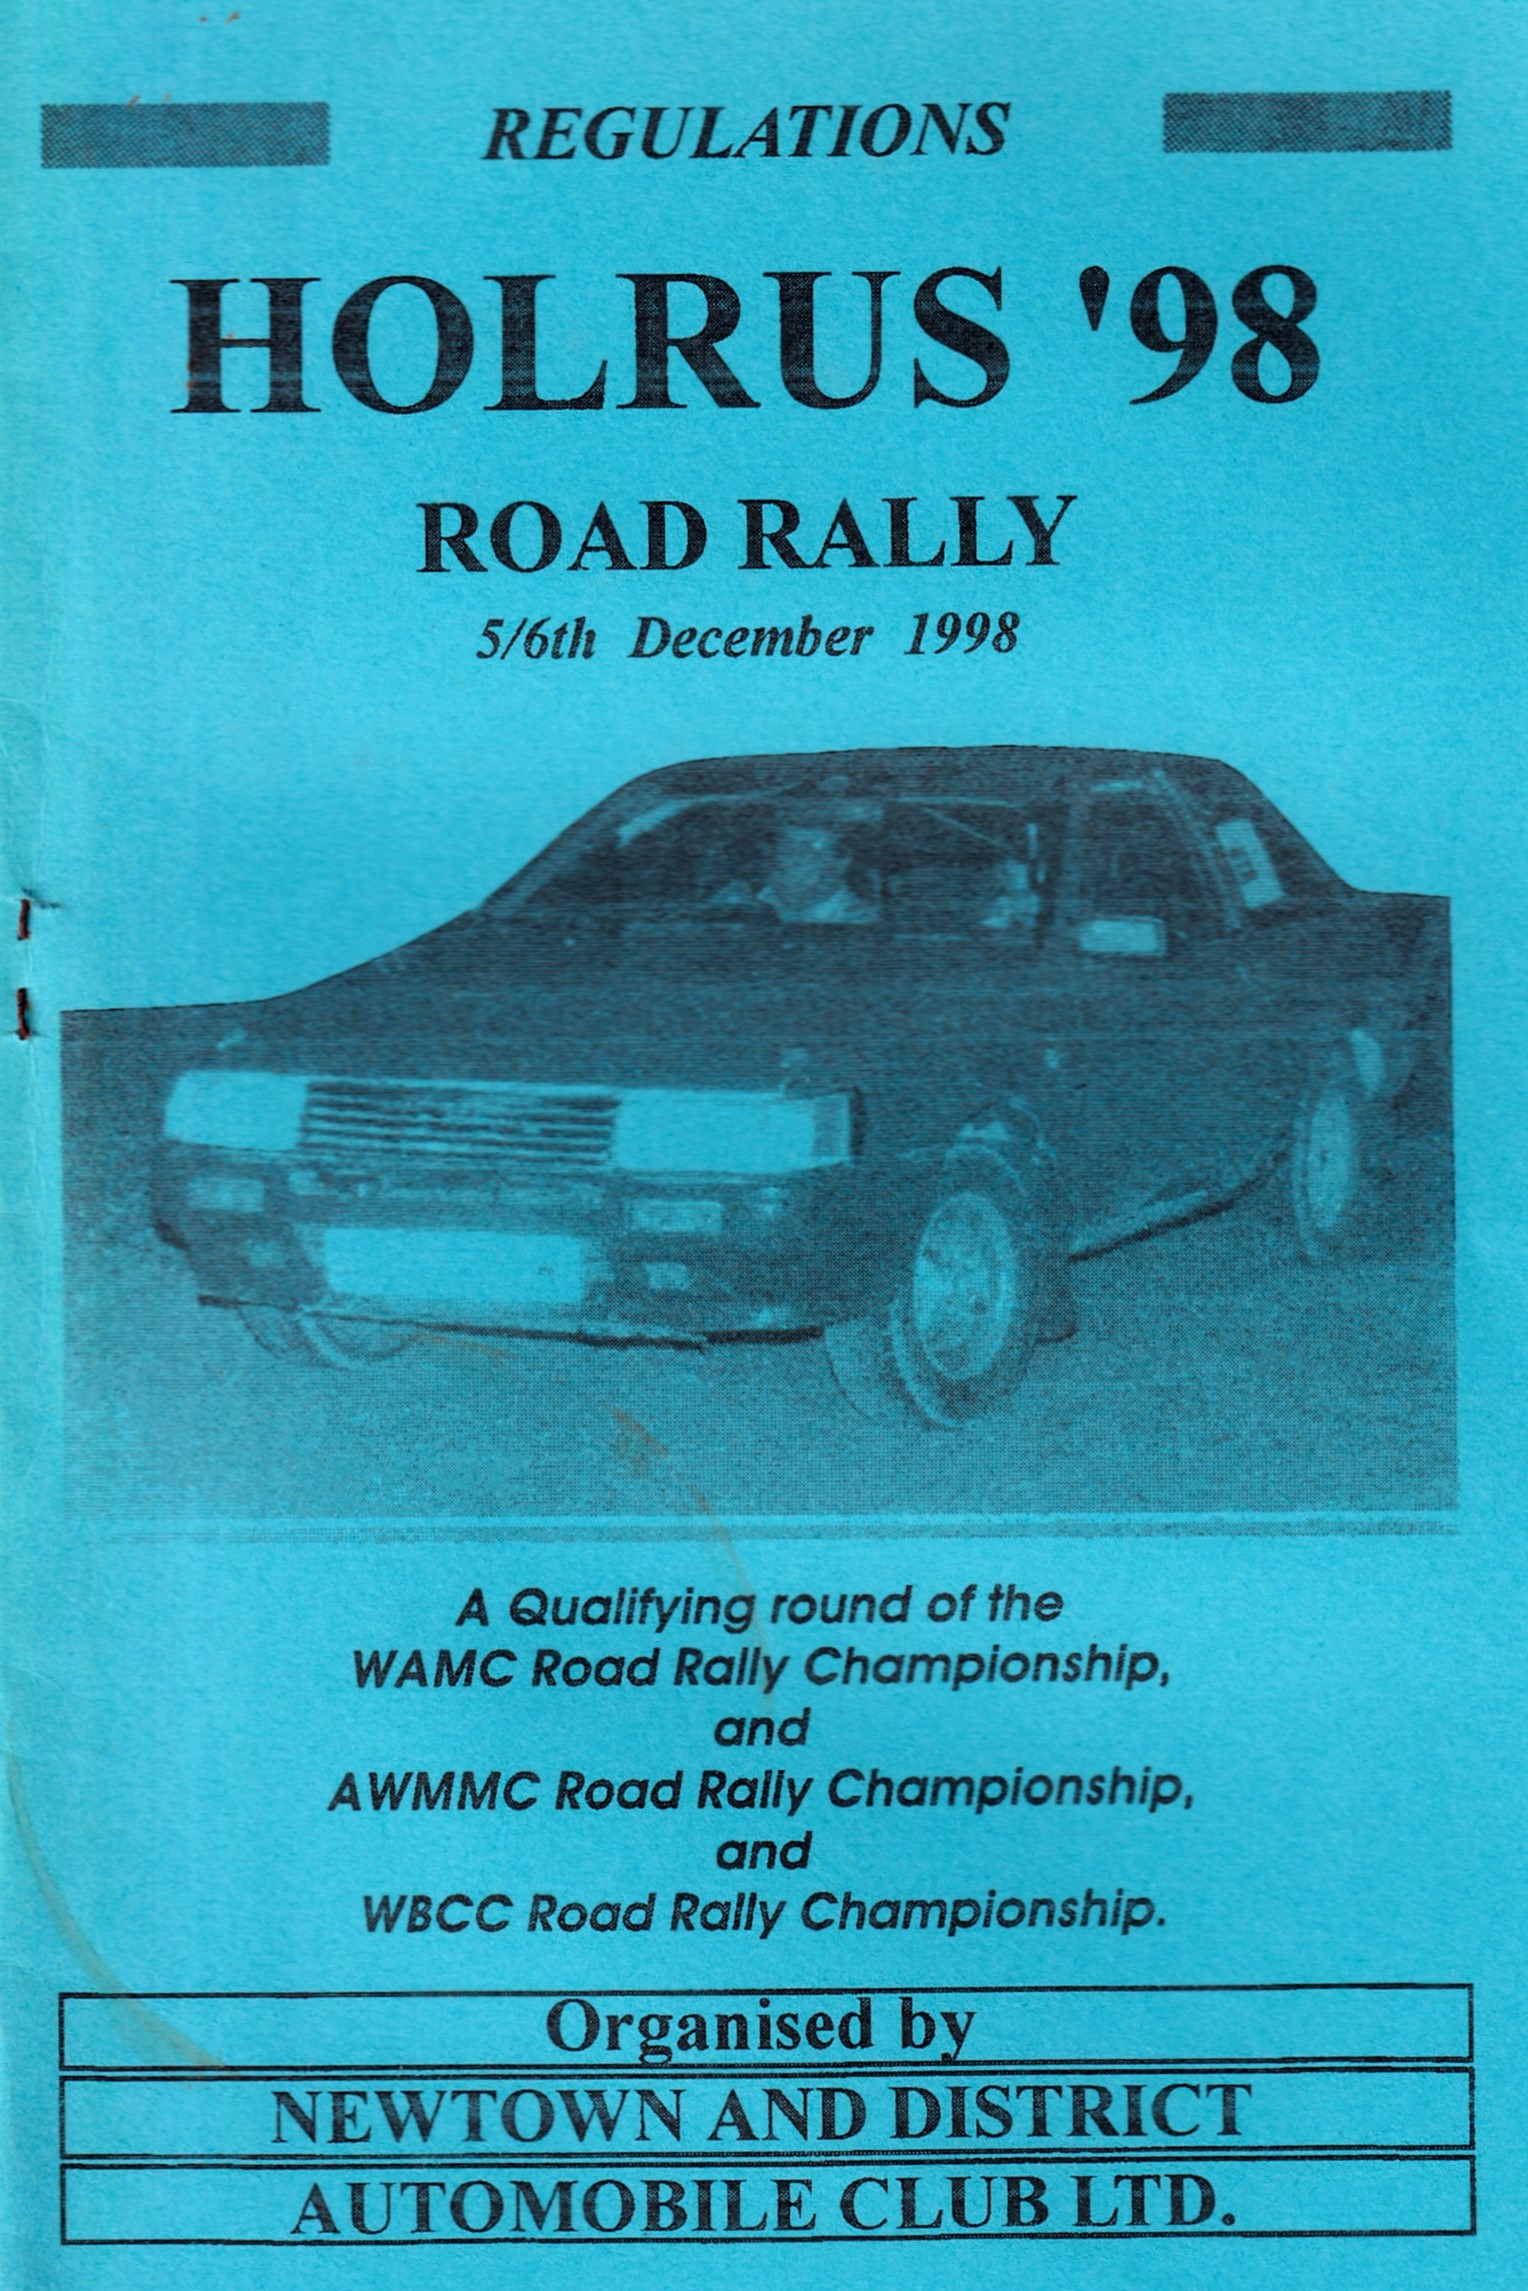 Holrus '98 Road Rally